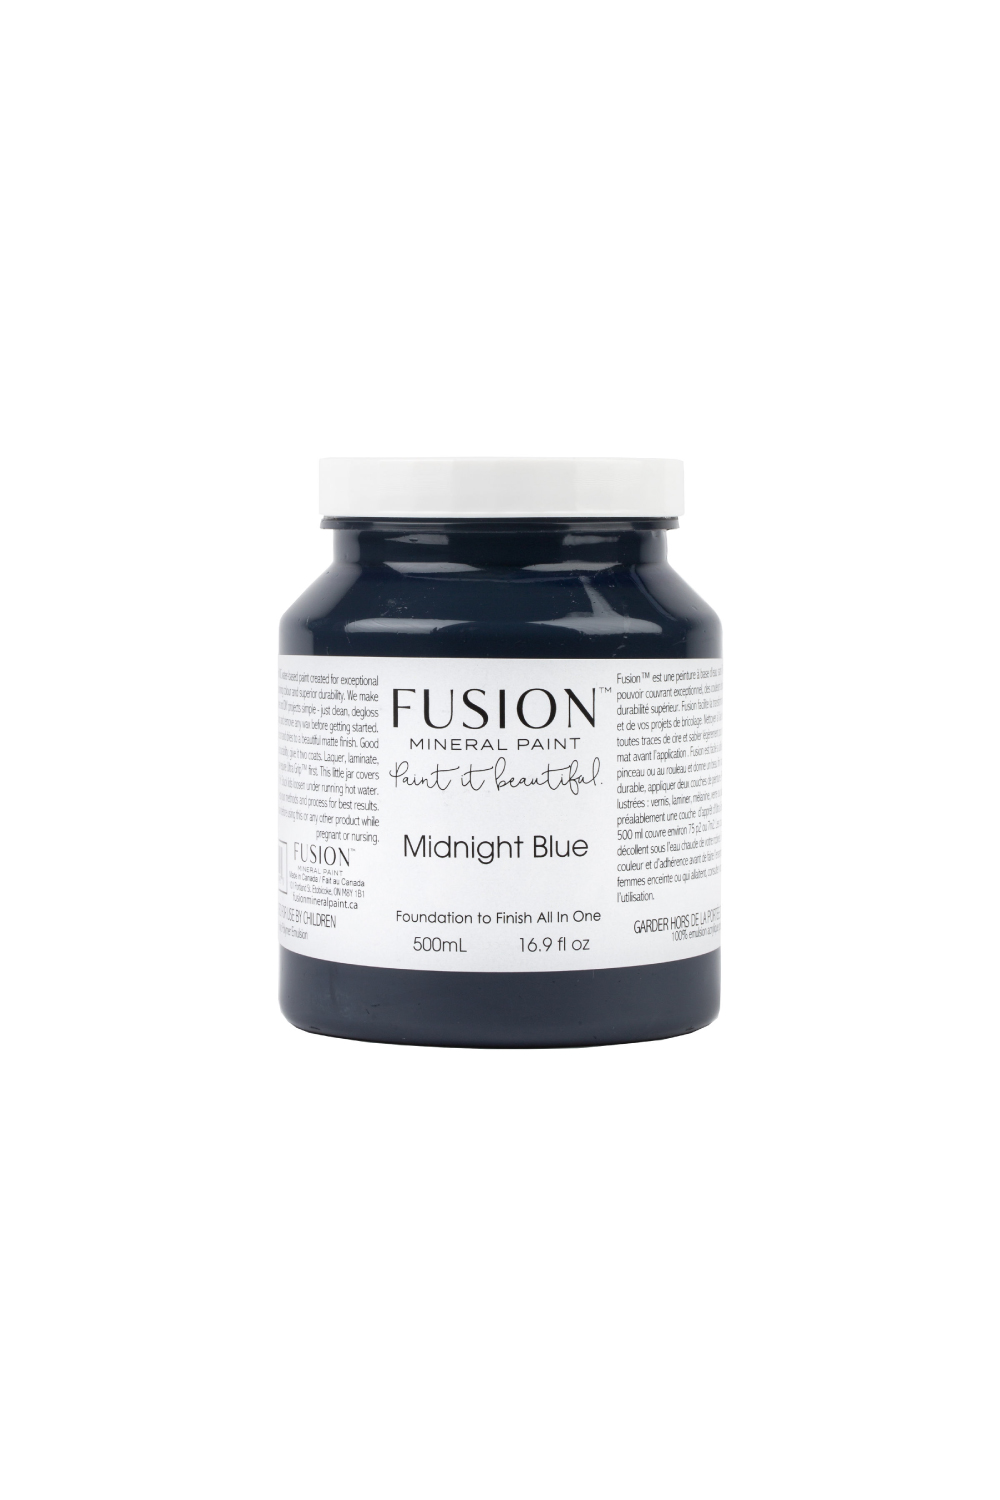 Fusion Mineral Paint vernice ecologica color blu scuro